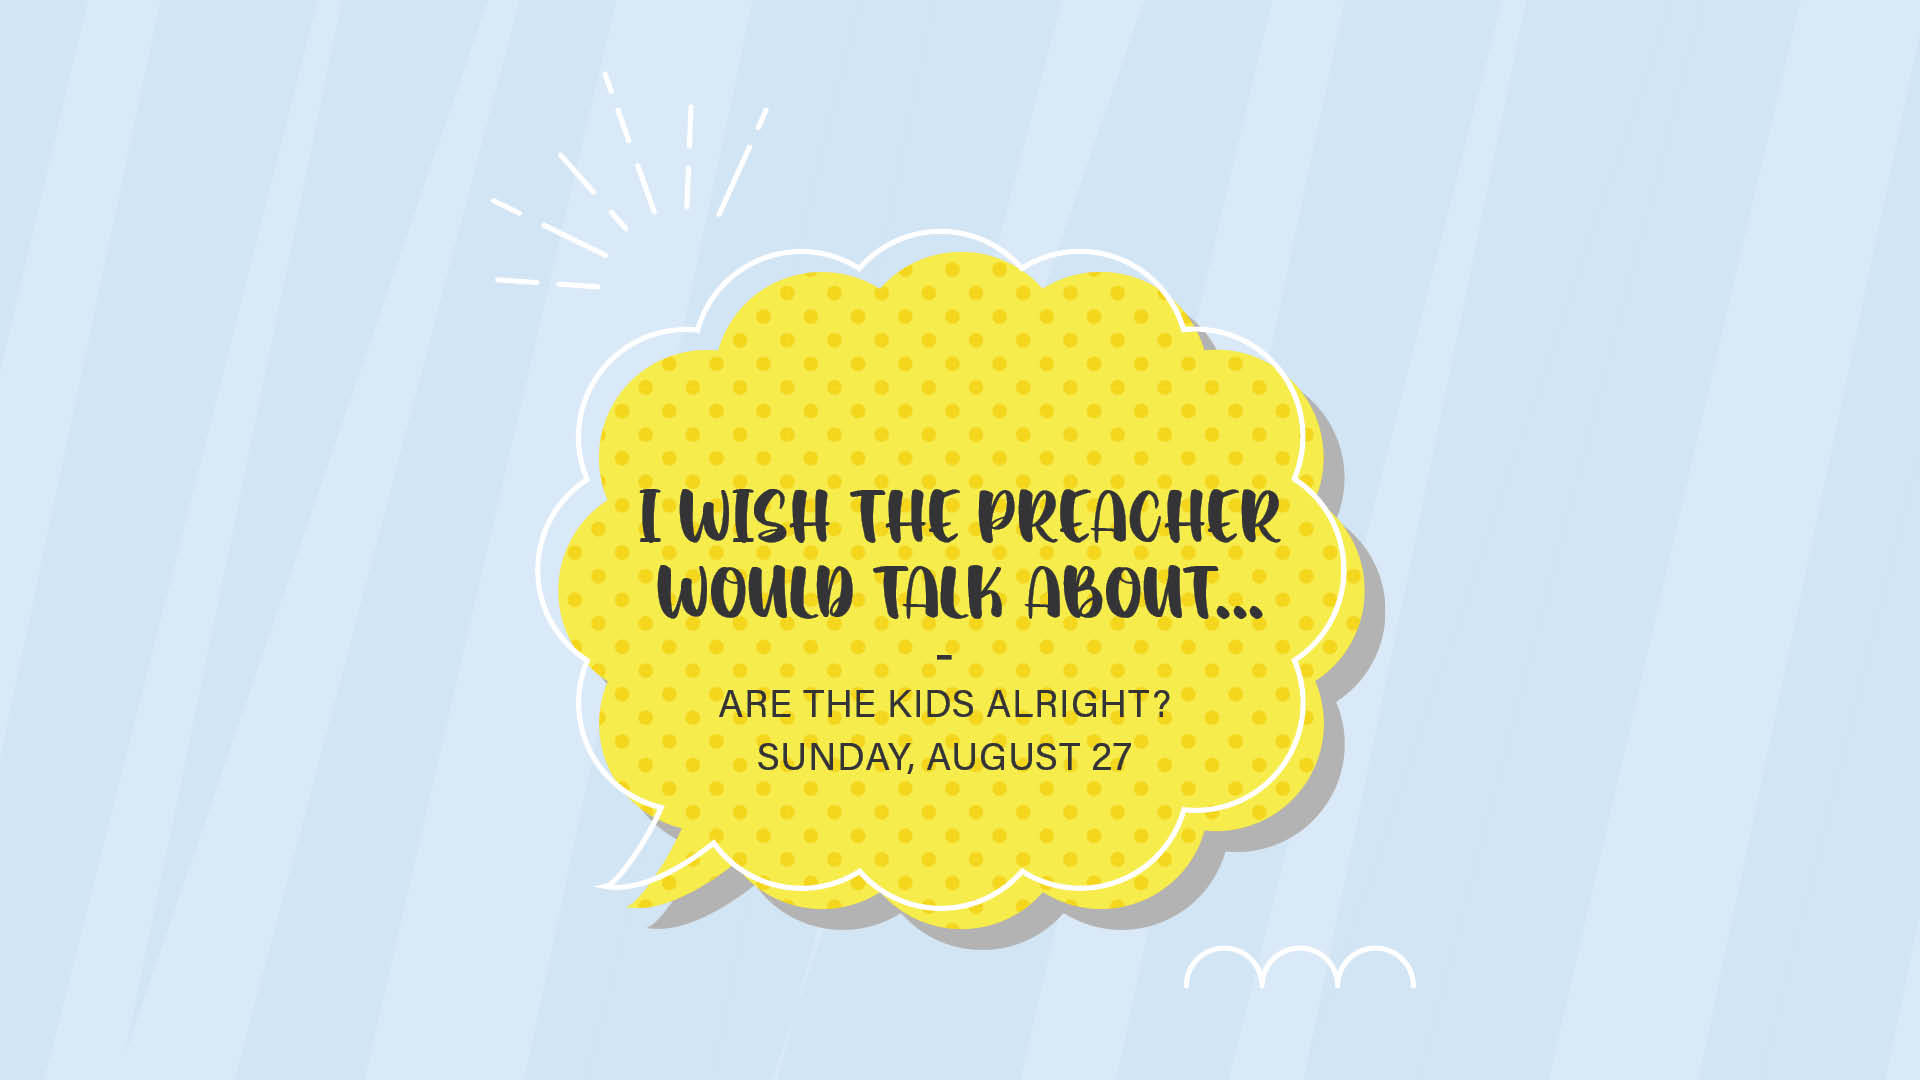 I Wish the Preacher Would Talk About: Are the Kids Alright?